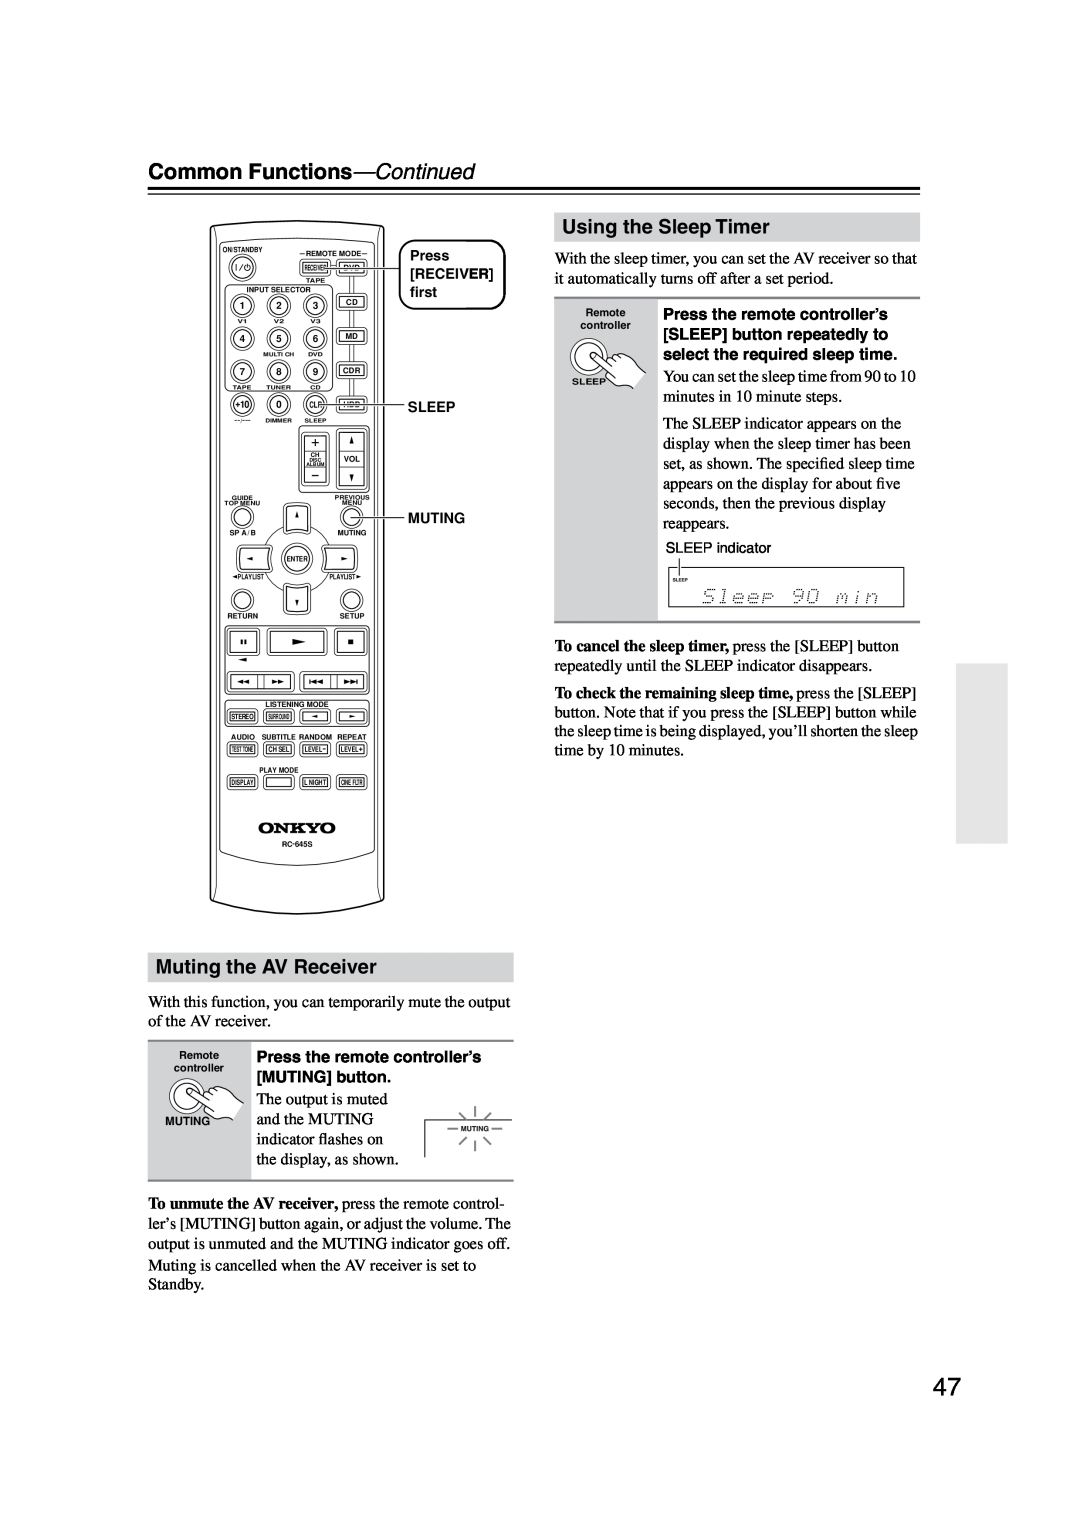 Onkyo HT-S4100 instruction manual Common Functions-Continued, Using the Sleep Timer, Muting the AV Receiver 